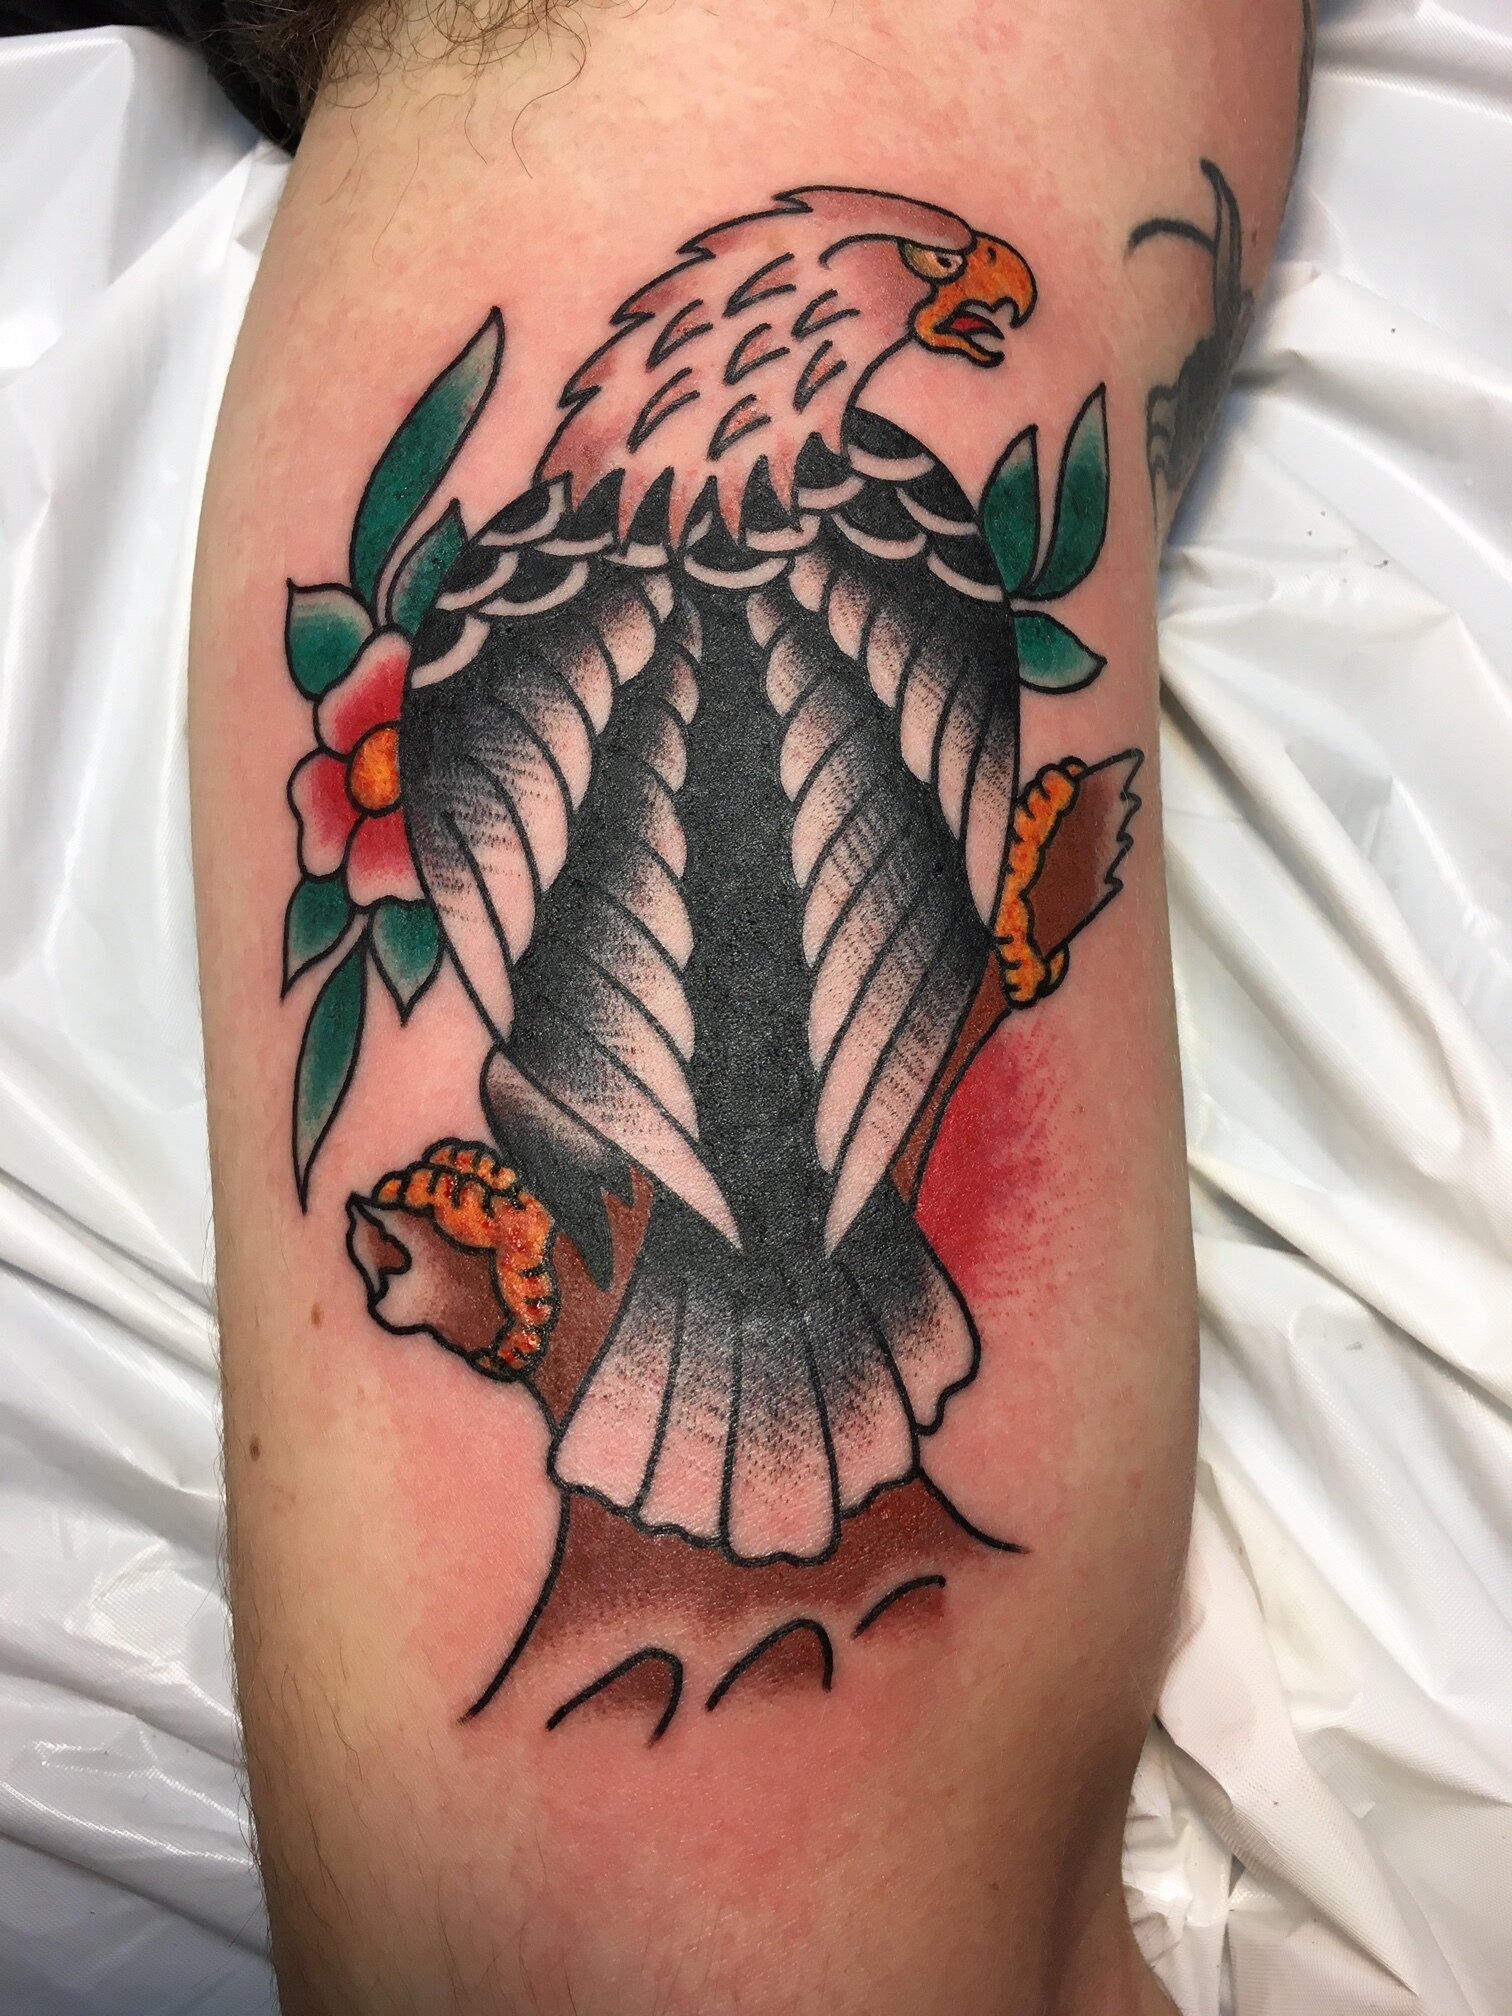 Traditional eagle tattoo in color by Brian Gattis at Southern Star Tattoo in Atlanta, Georgia